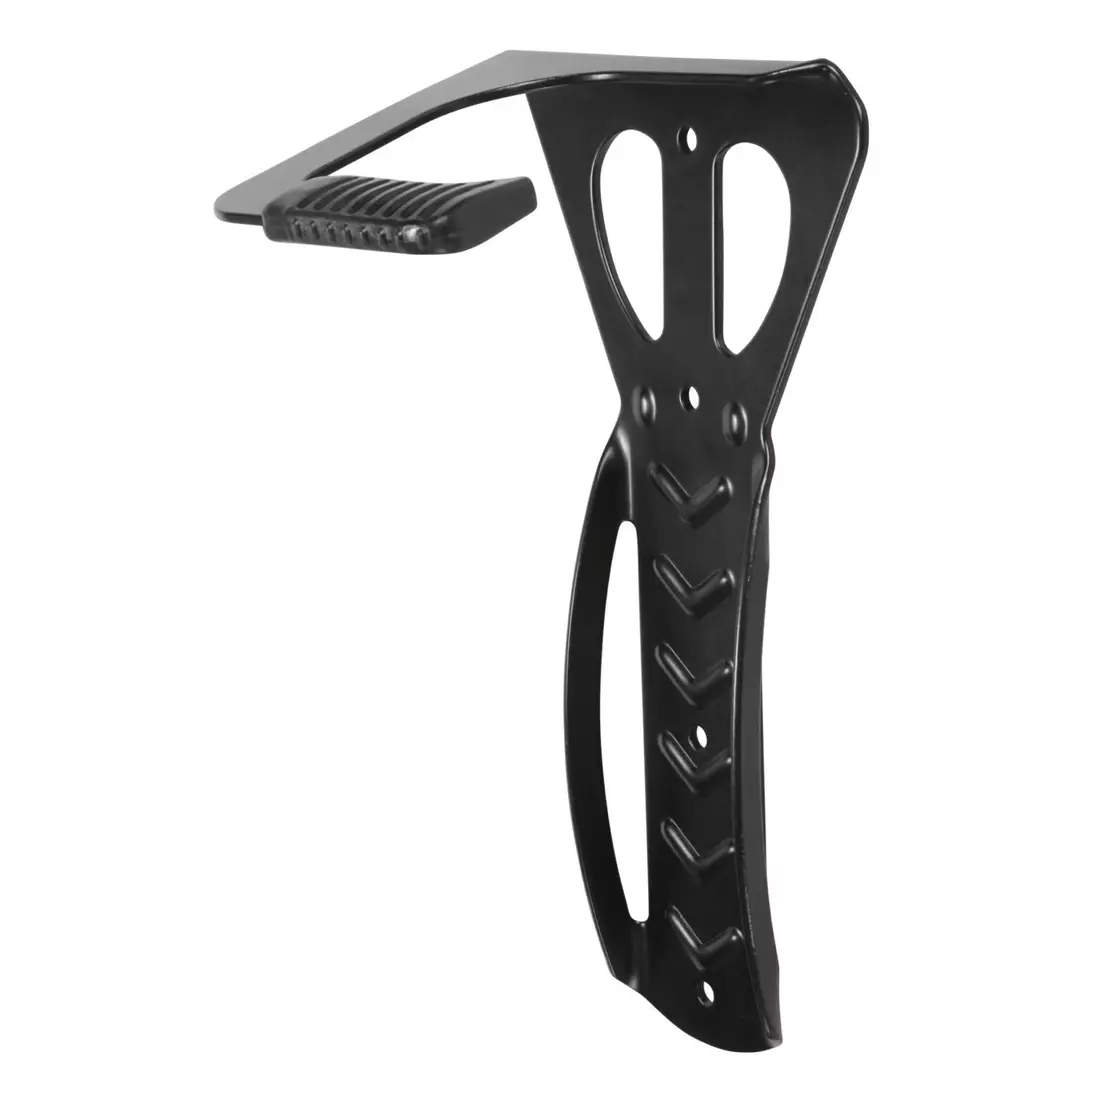 JUST ONE HOOK 2.0 Bicycle holder 950110